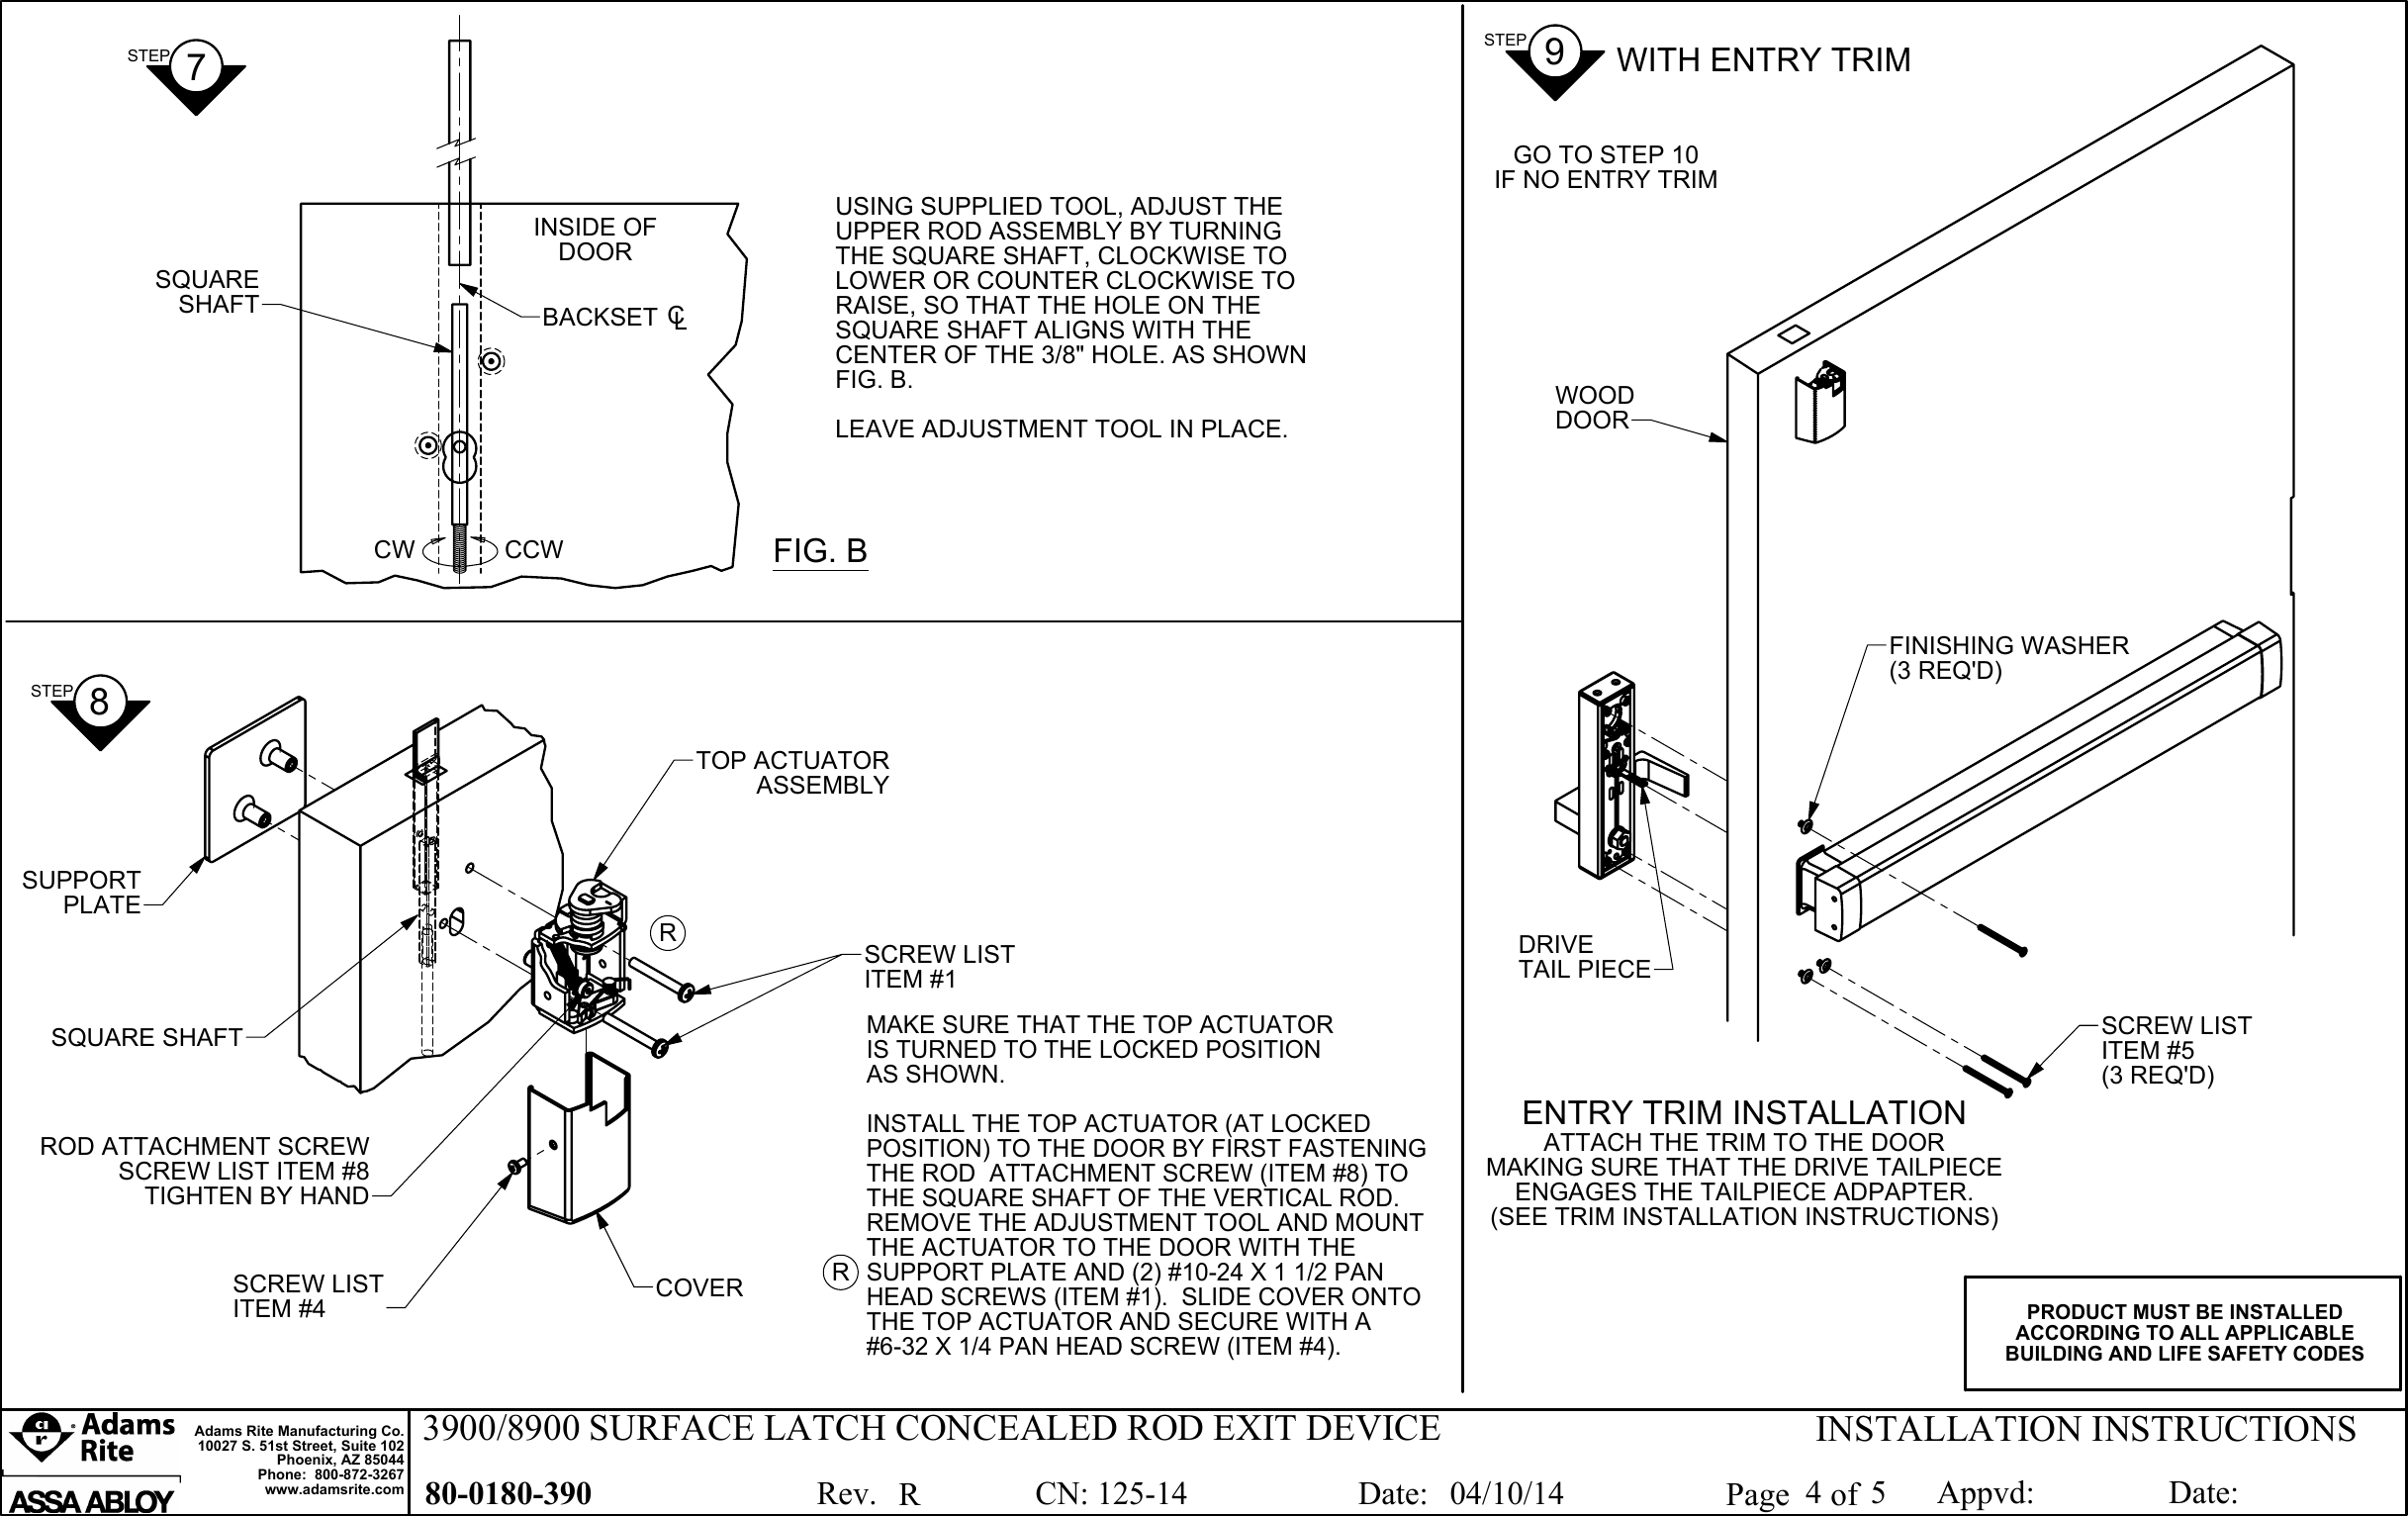 Page 4 of 5 - Adams Rite 80-0180-390_R 3900/8900 Surface Latch Concealed Rod Exit Device Installation Instructions 3900 8900 80-0180-390 R